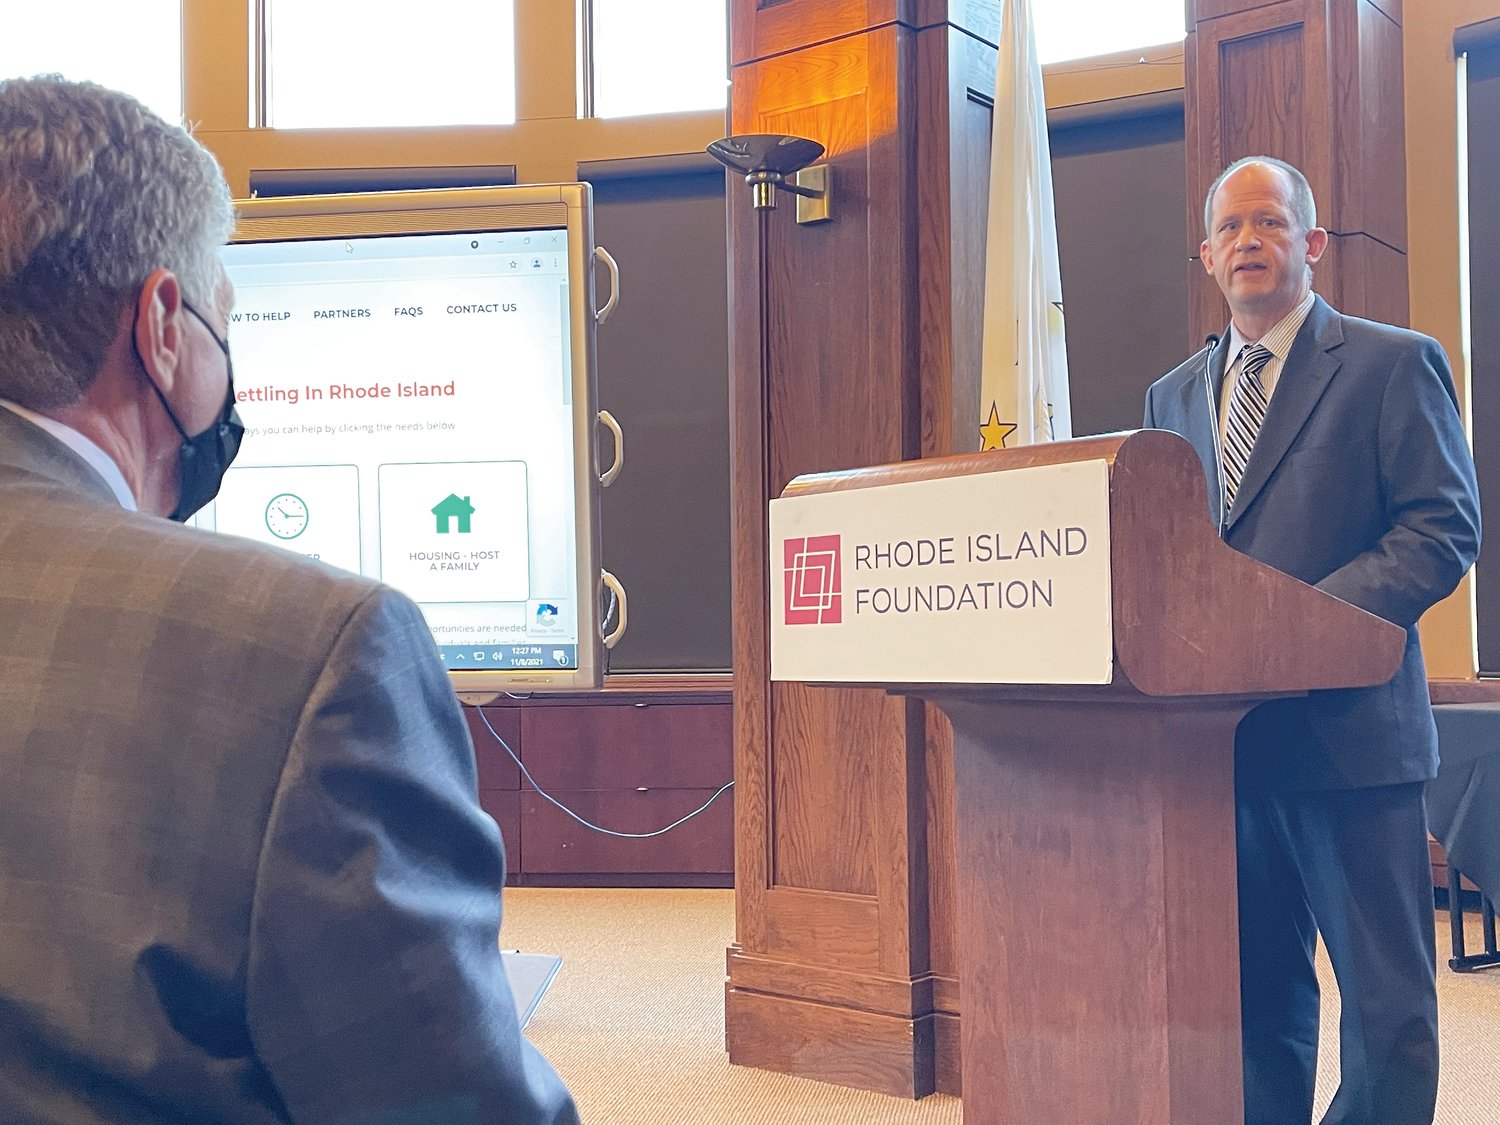 Gov. Dan McKee looks on as Secretary for Catholic Charities and Social Ministry James Jahnz speaks from the podium about how the Diocese of Providence will help to resettle Afghan evacuees in Rhode Island.